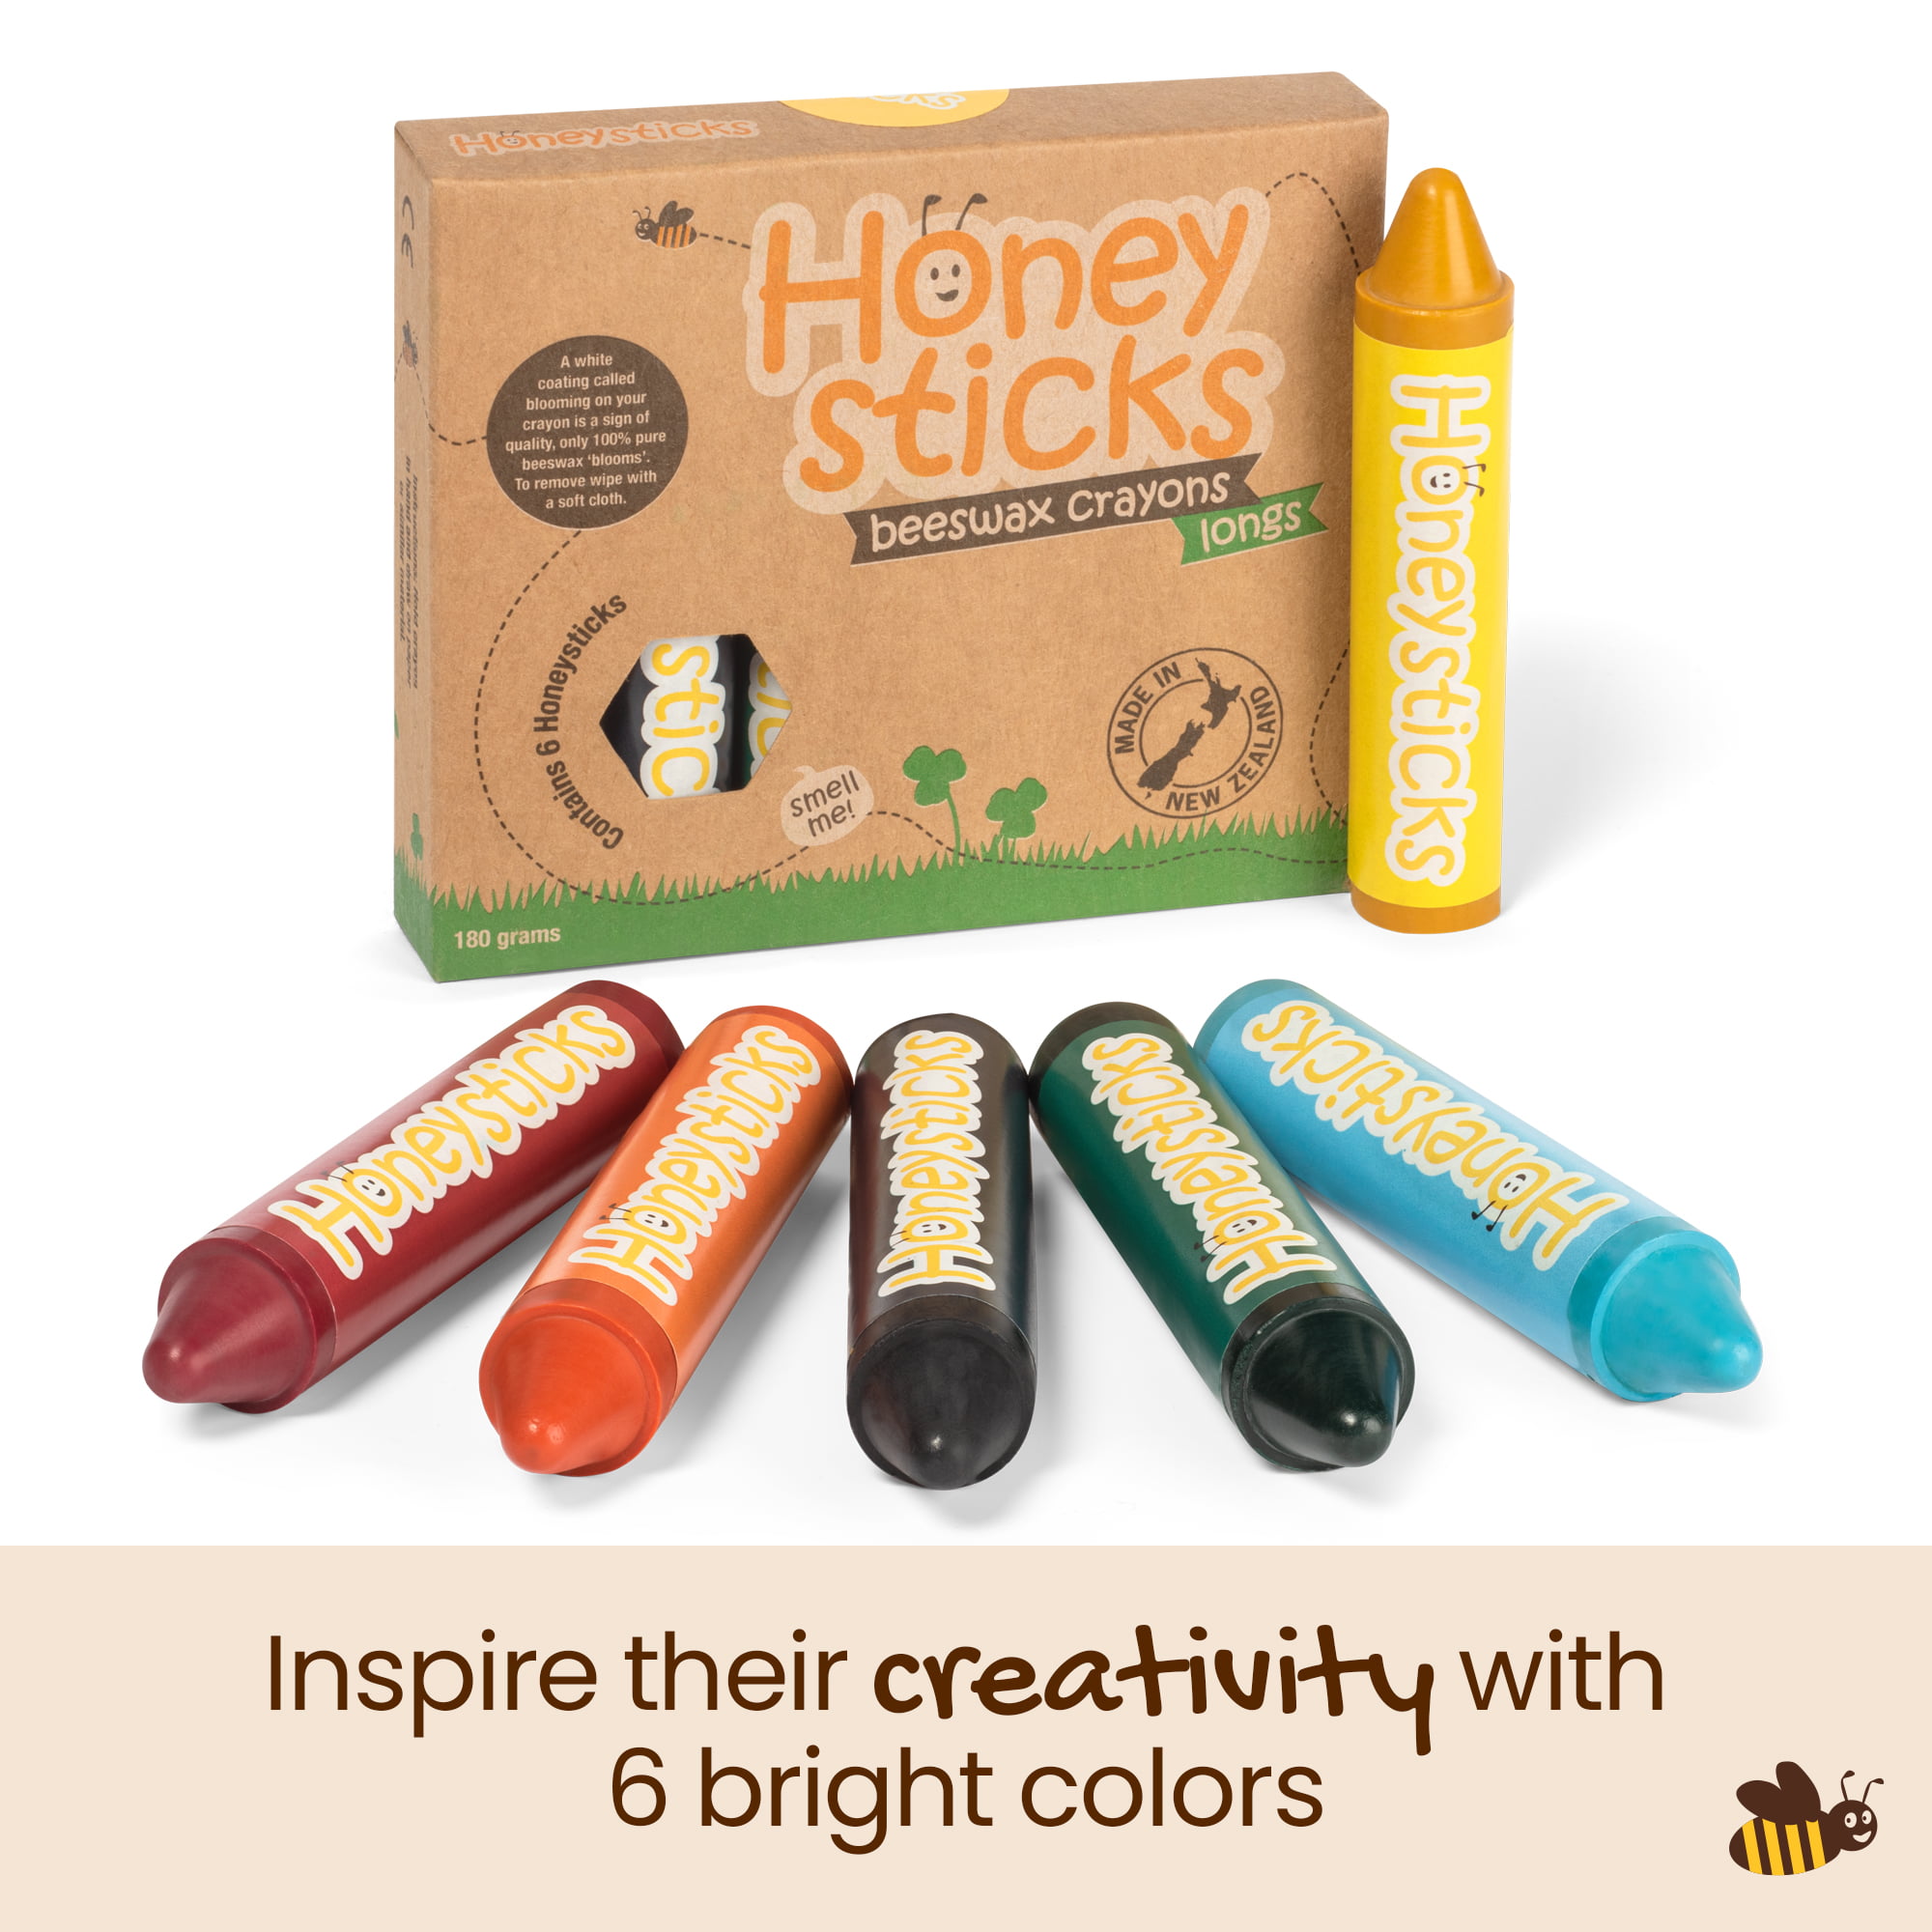 Honeysticks 100% Pure Beeswax Crayons (12 Pack) - Pastel Coloured, Non  Toxic Crayons, Safe for Babies and Toddlers, For 1 Year Plus, Food-Grade  Colors